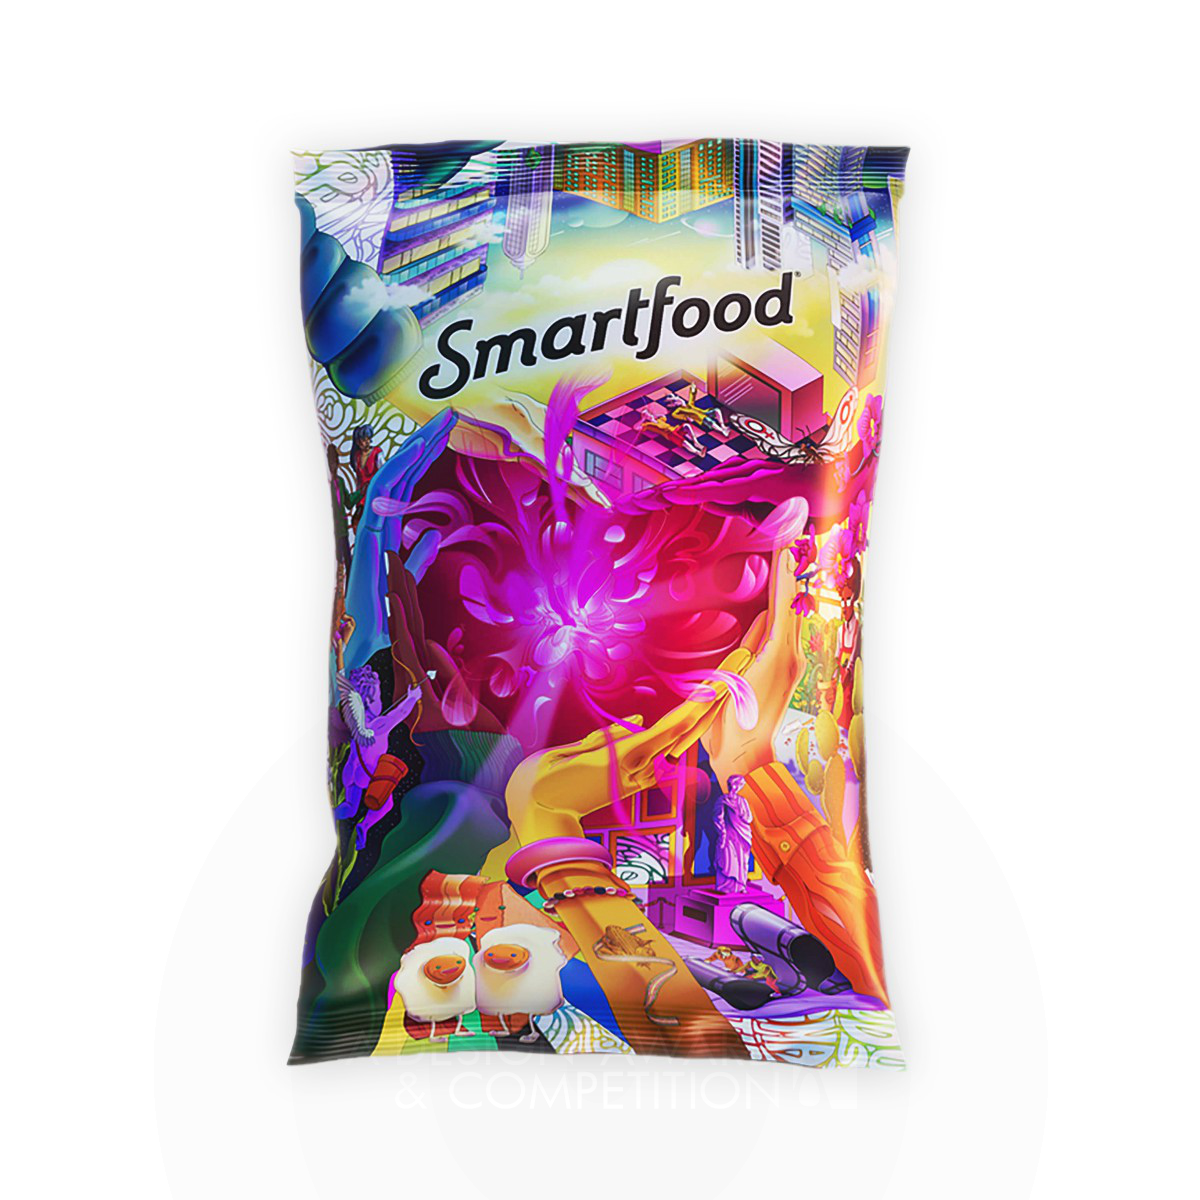 All Love is Smart Love Smartfood x Glaad Food Packaging by PepsiCo Design and Innovation